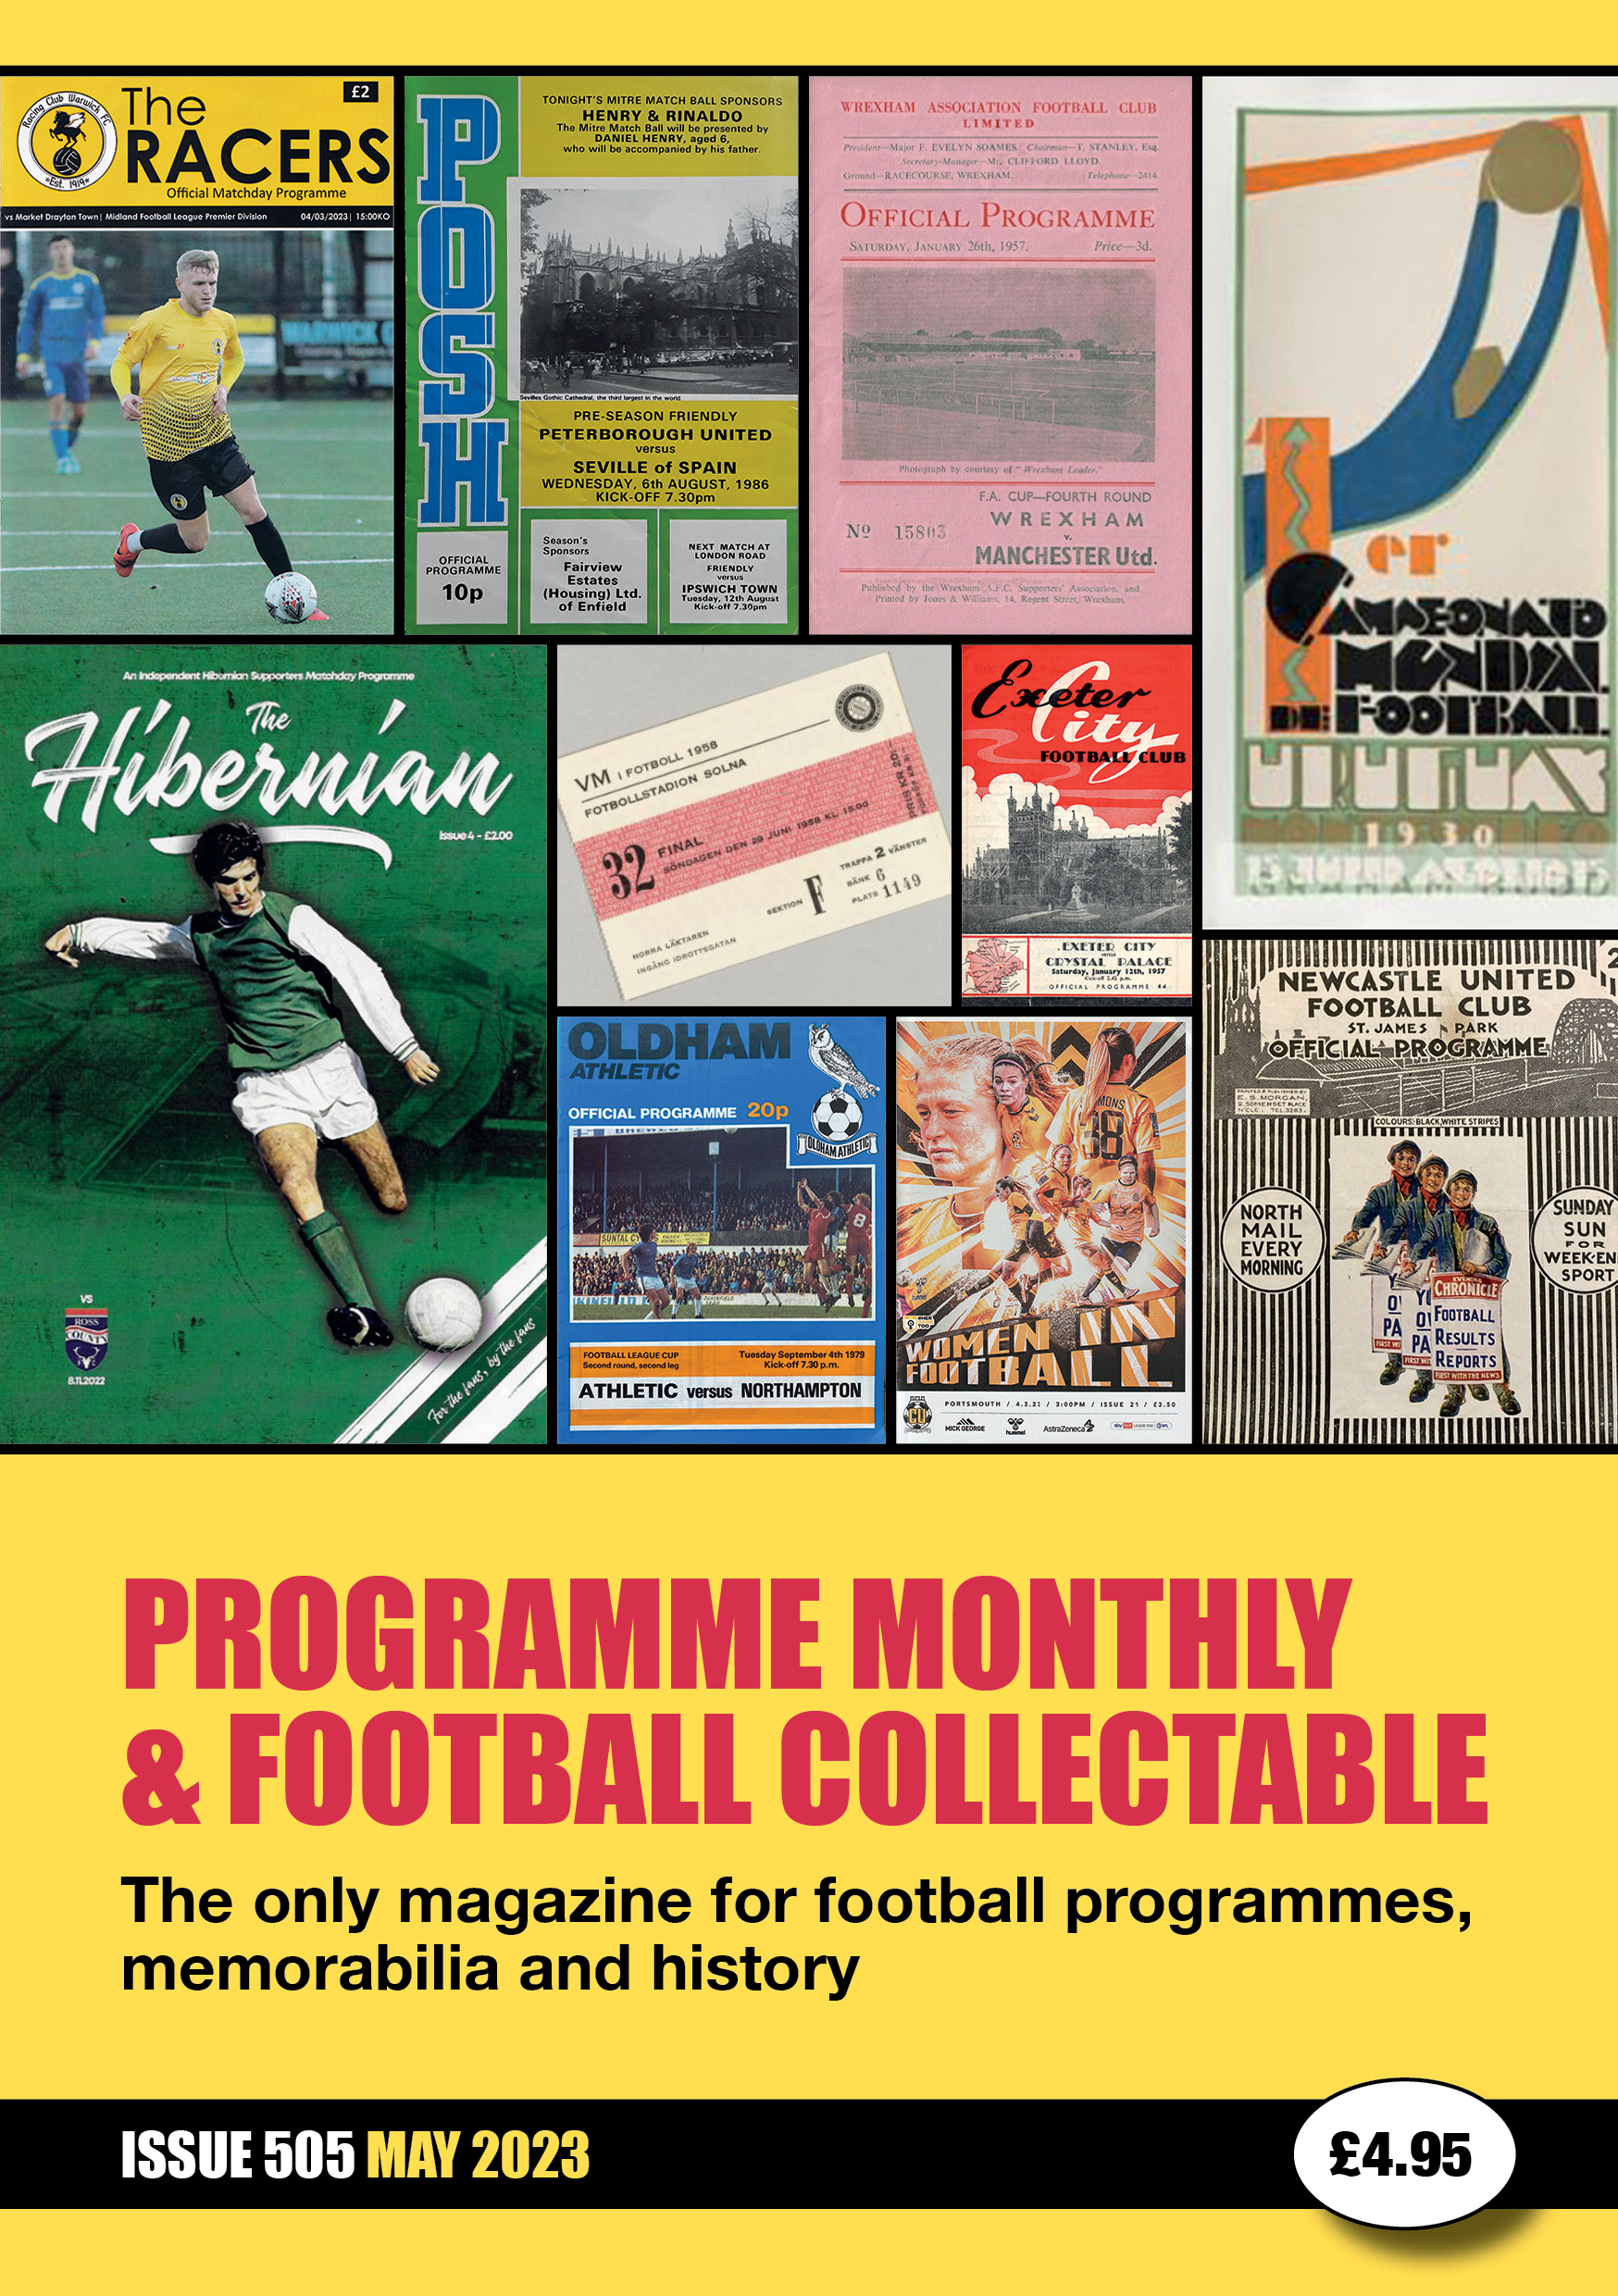 Programme Monthly - Issue 505 May 2023